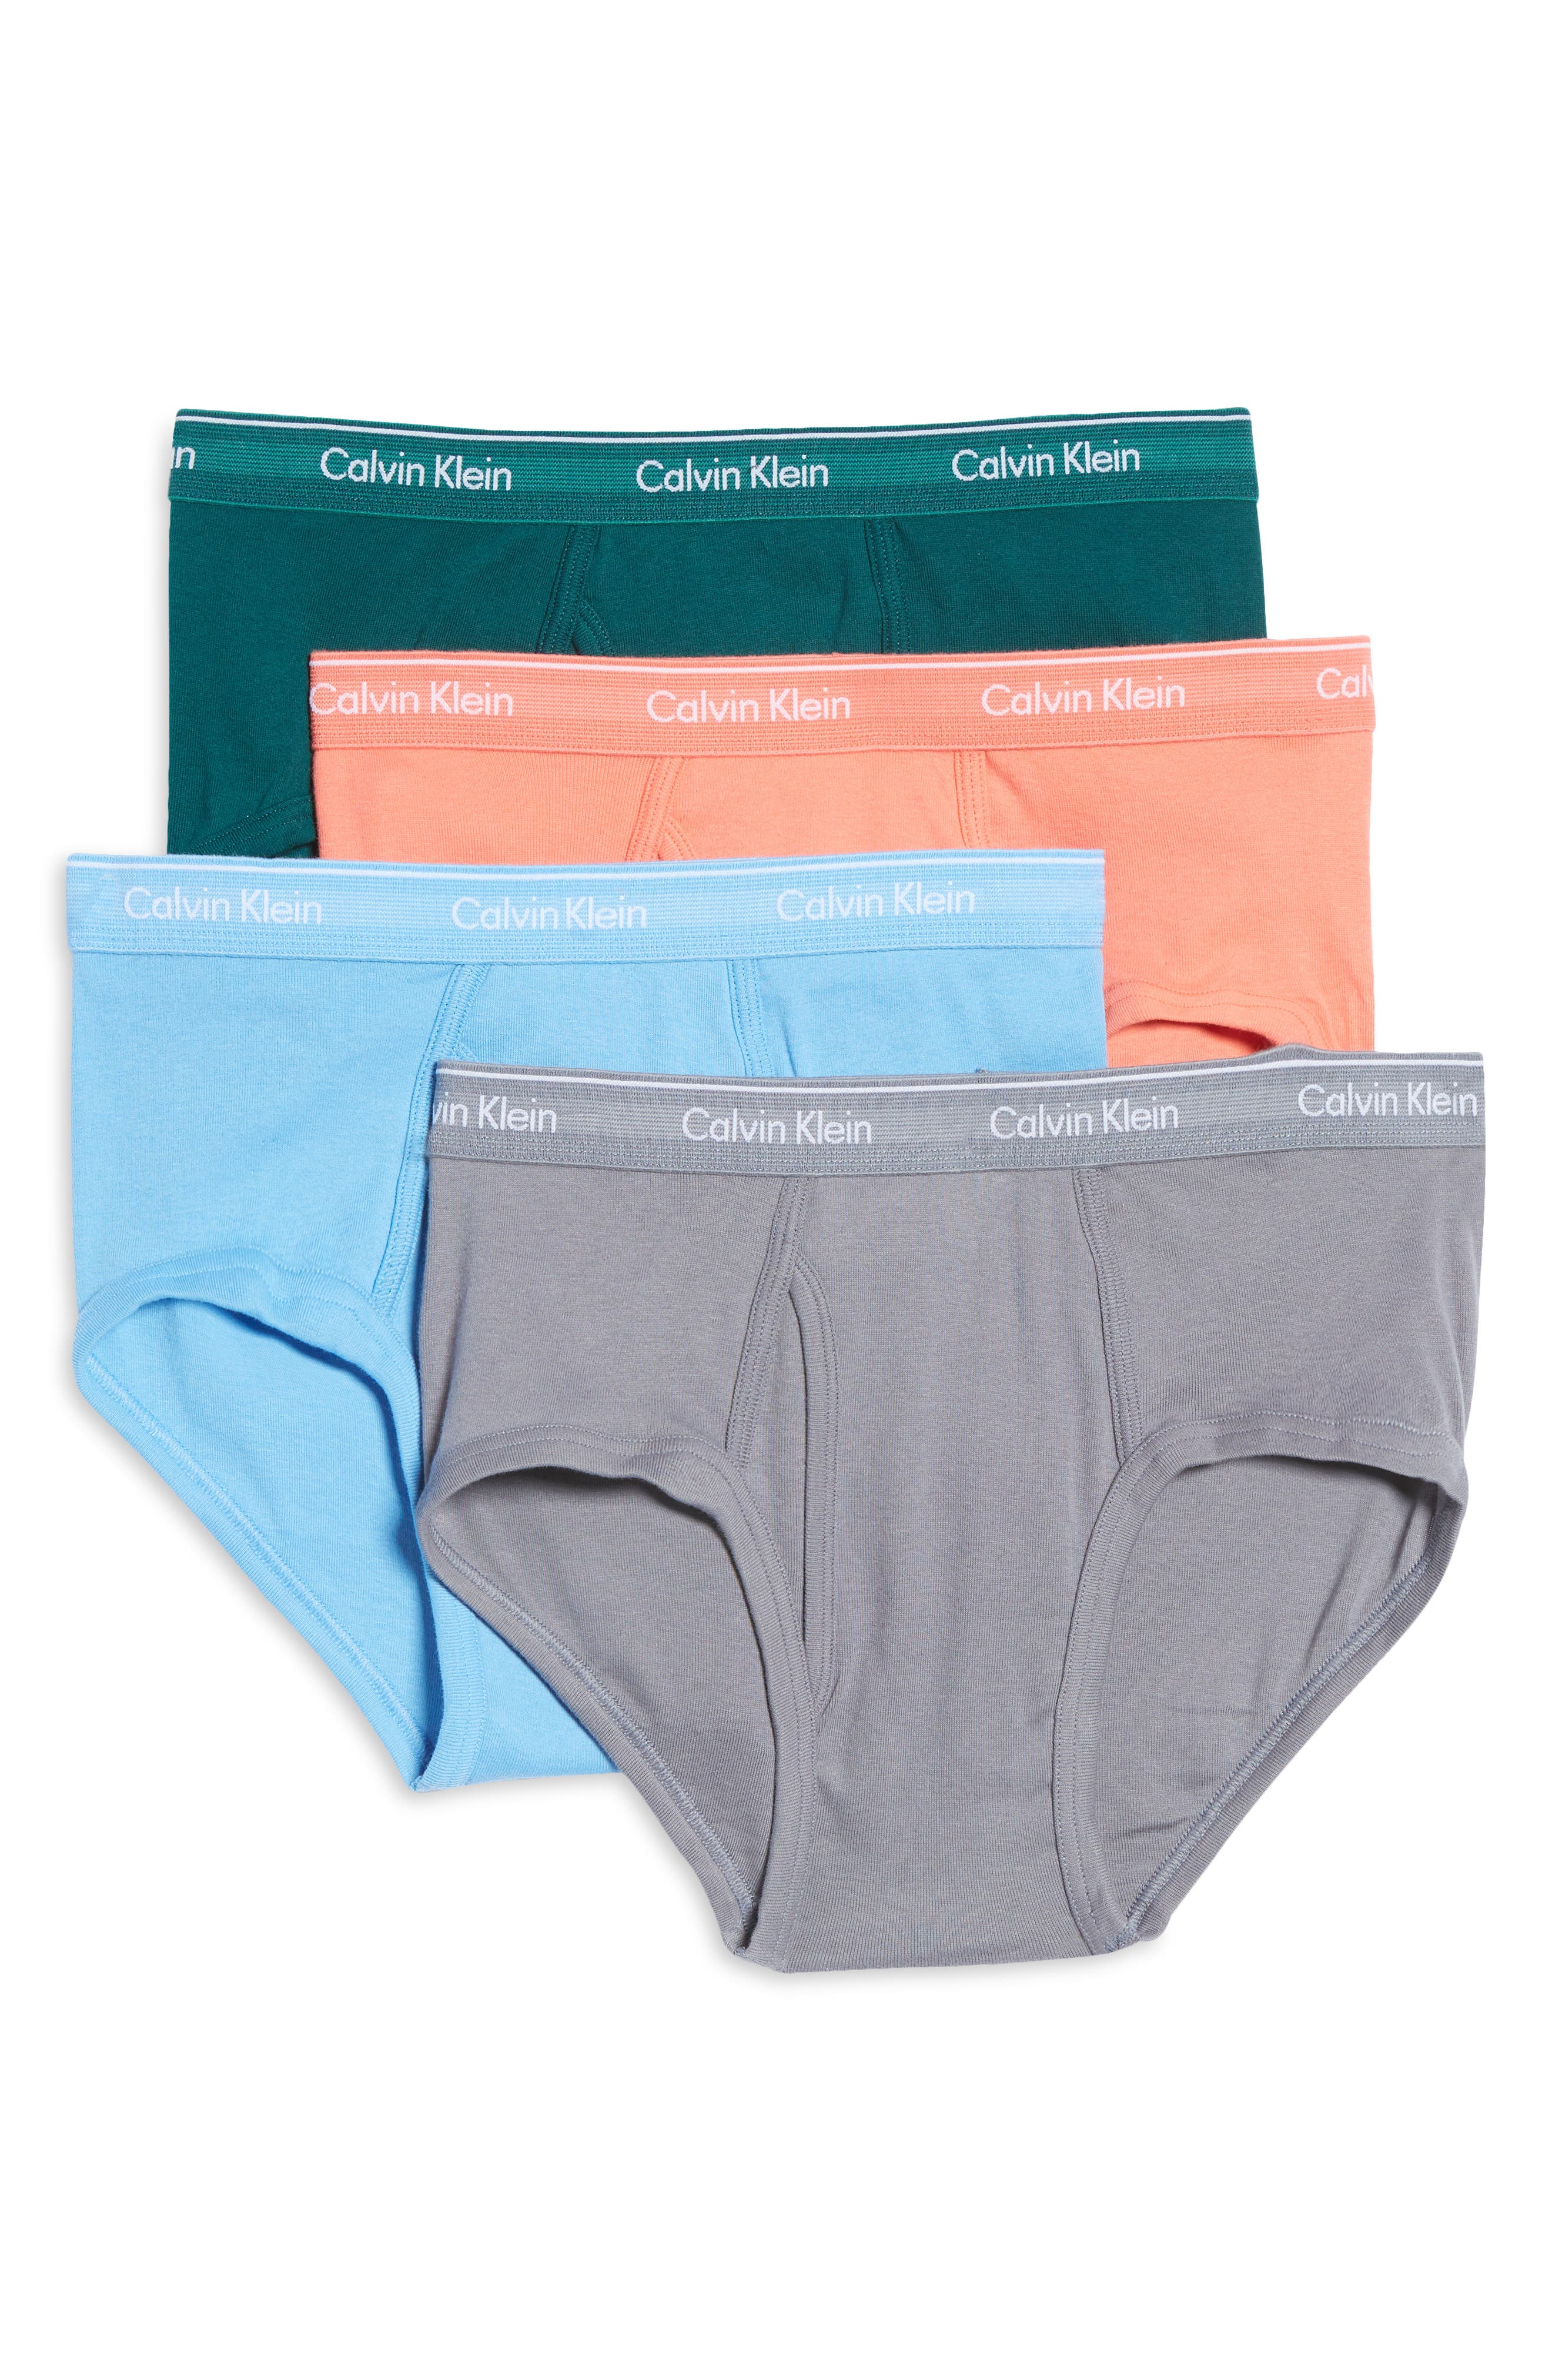 UPC 790812541647 product image for Men's Calvin Klein 4-Pack Briefs, Size Small - Green | upcitemdb.com